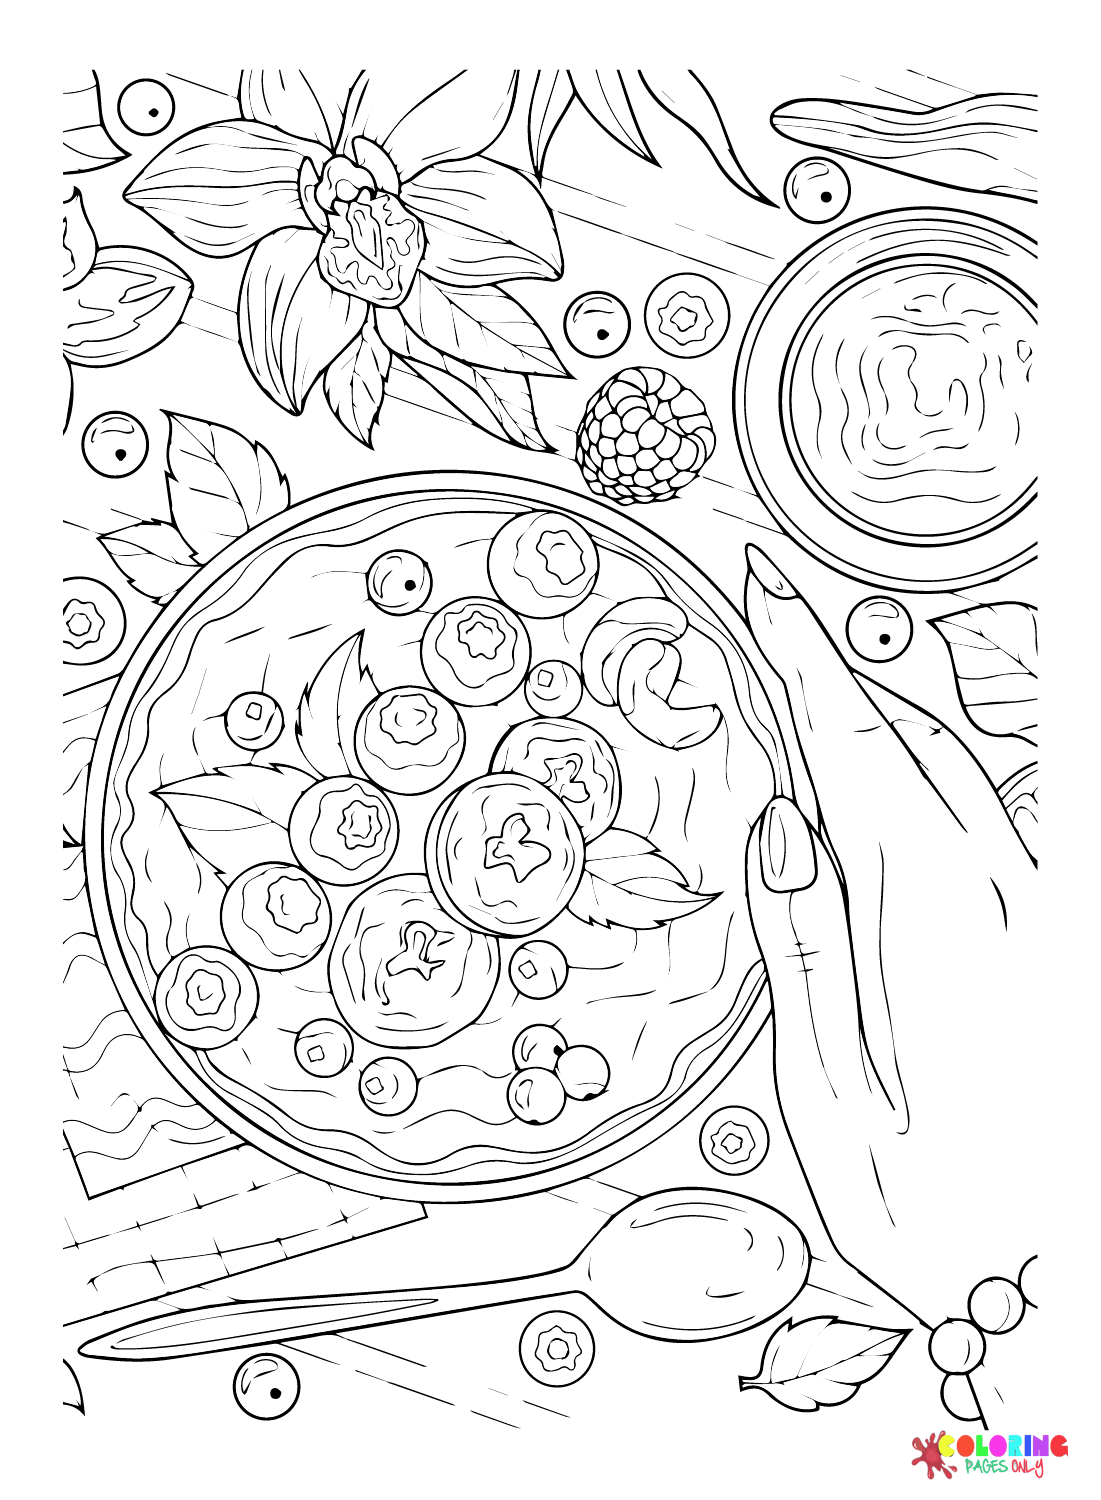 Blueberry Pie Coloring Page